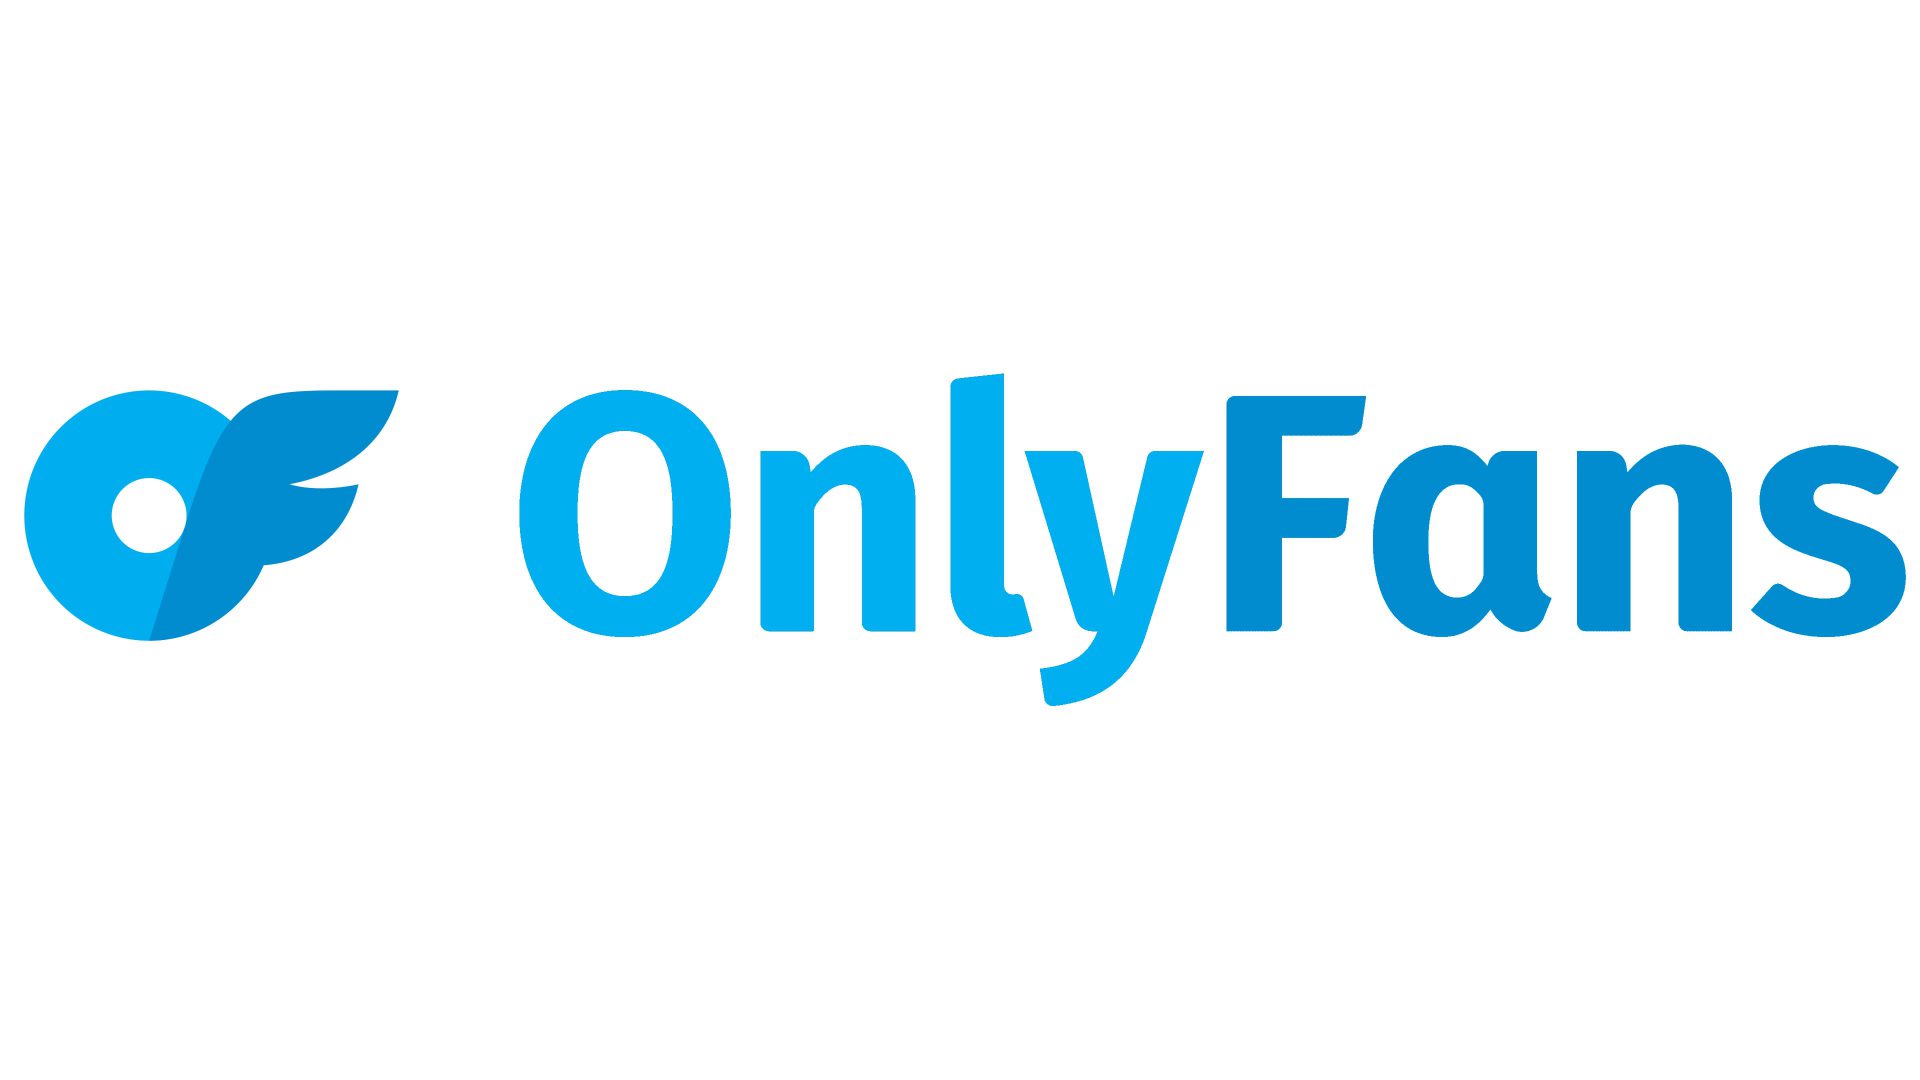 What Is Onlyfans Used For?